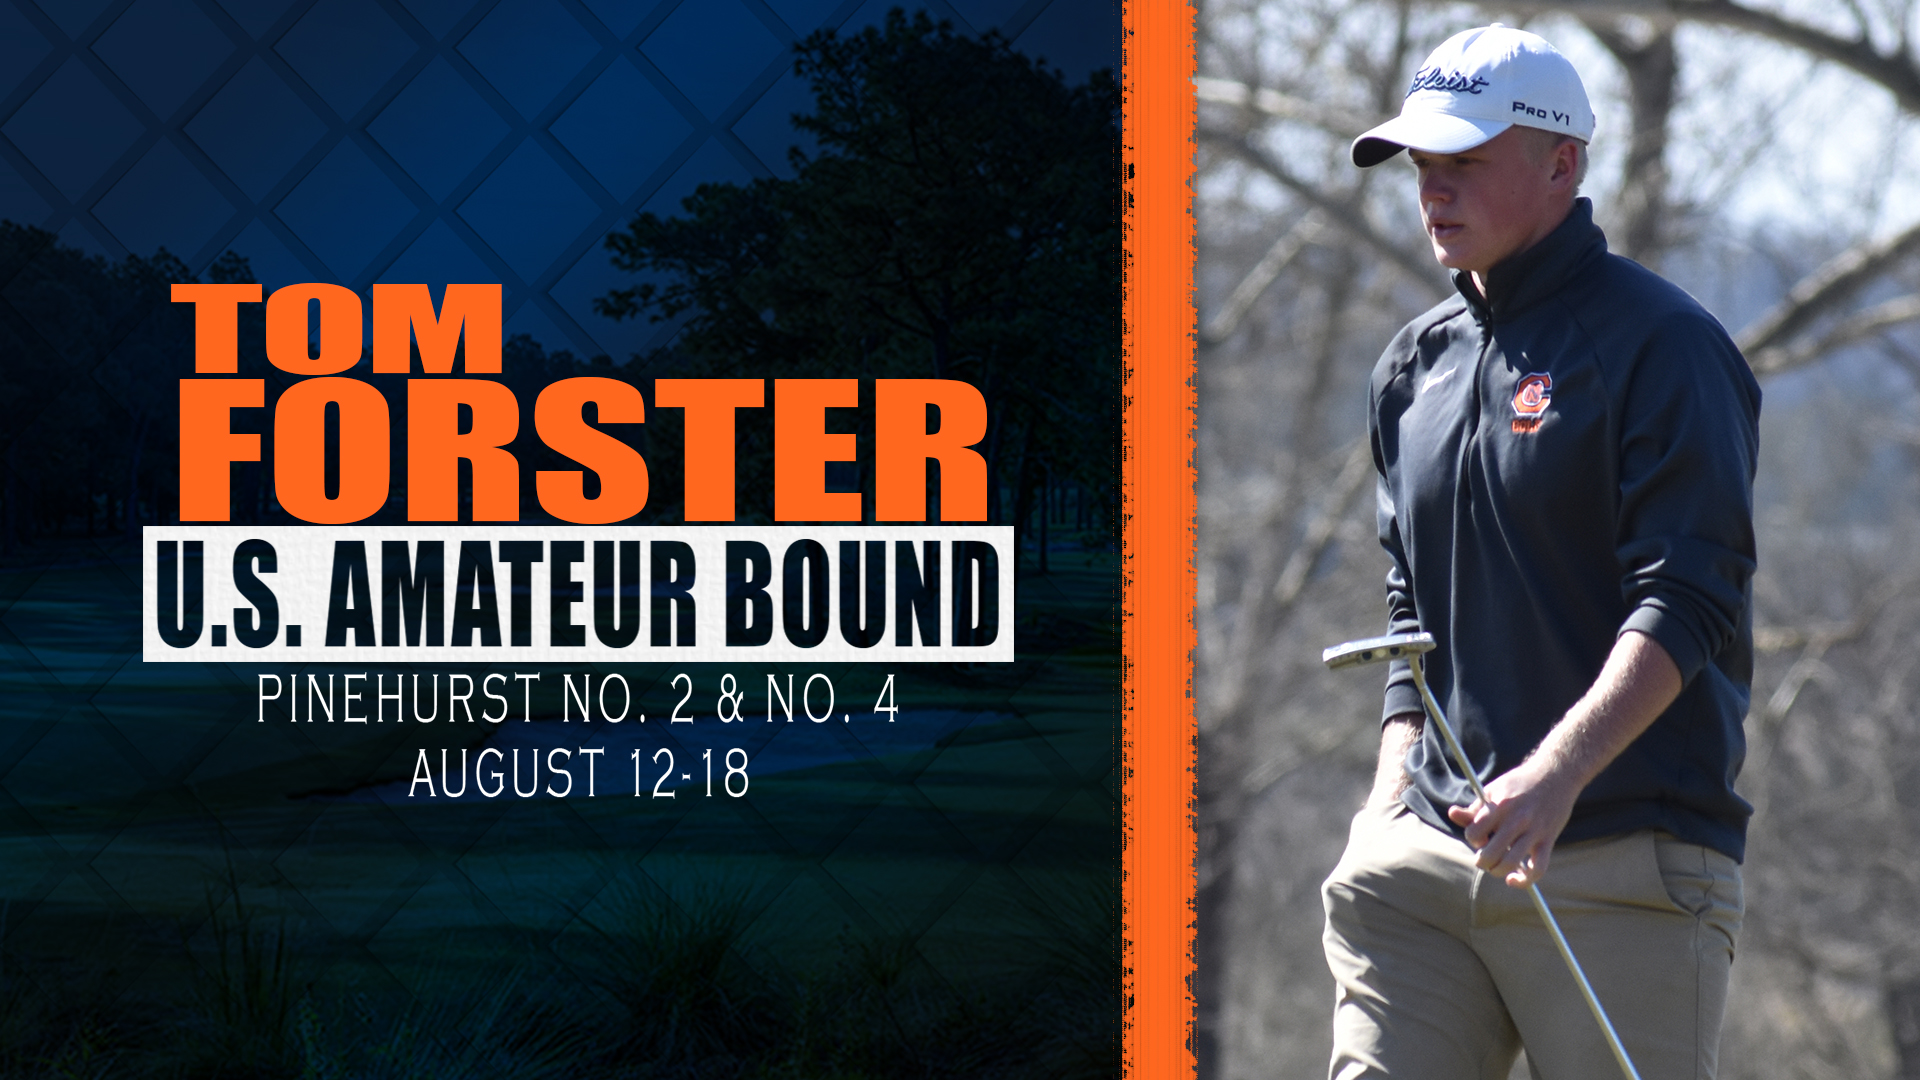 Forster set to play in 119th U.S. Amateur